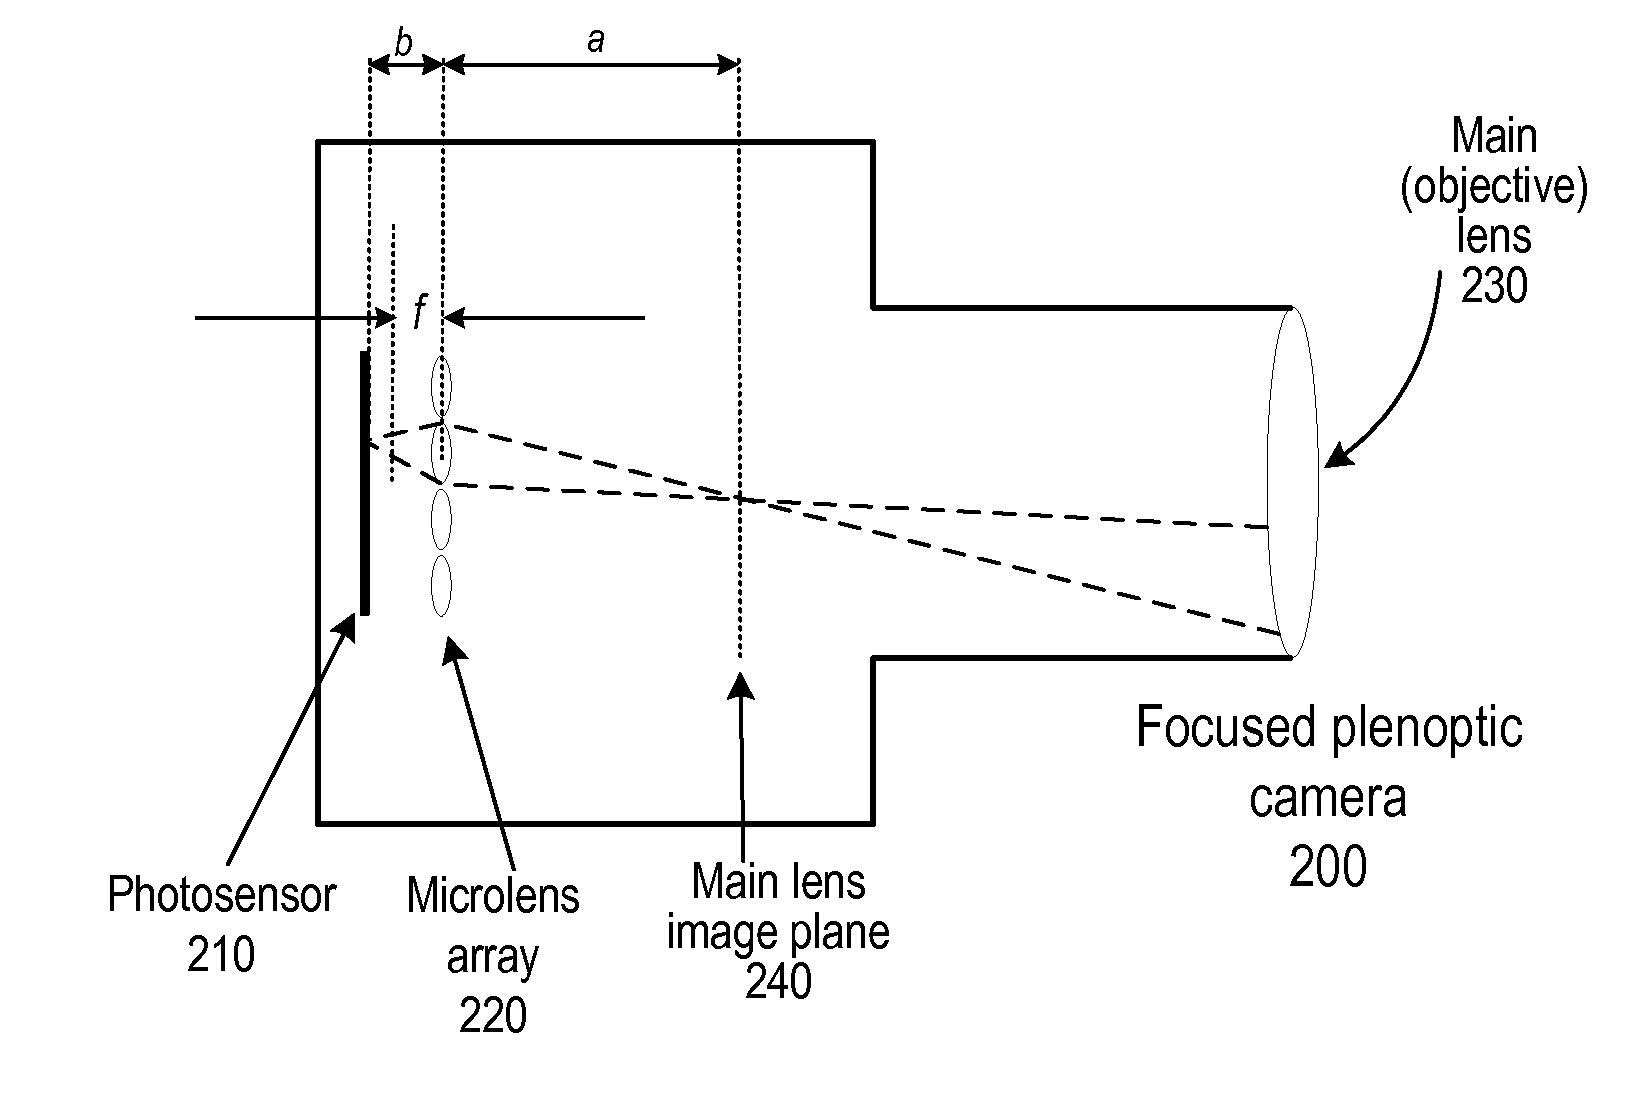 Focused Plenoptic Camera Employing Different Apertures or Filtering at Different Microlenses